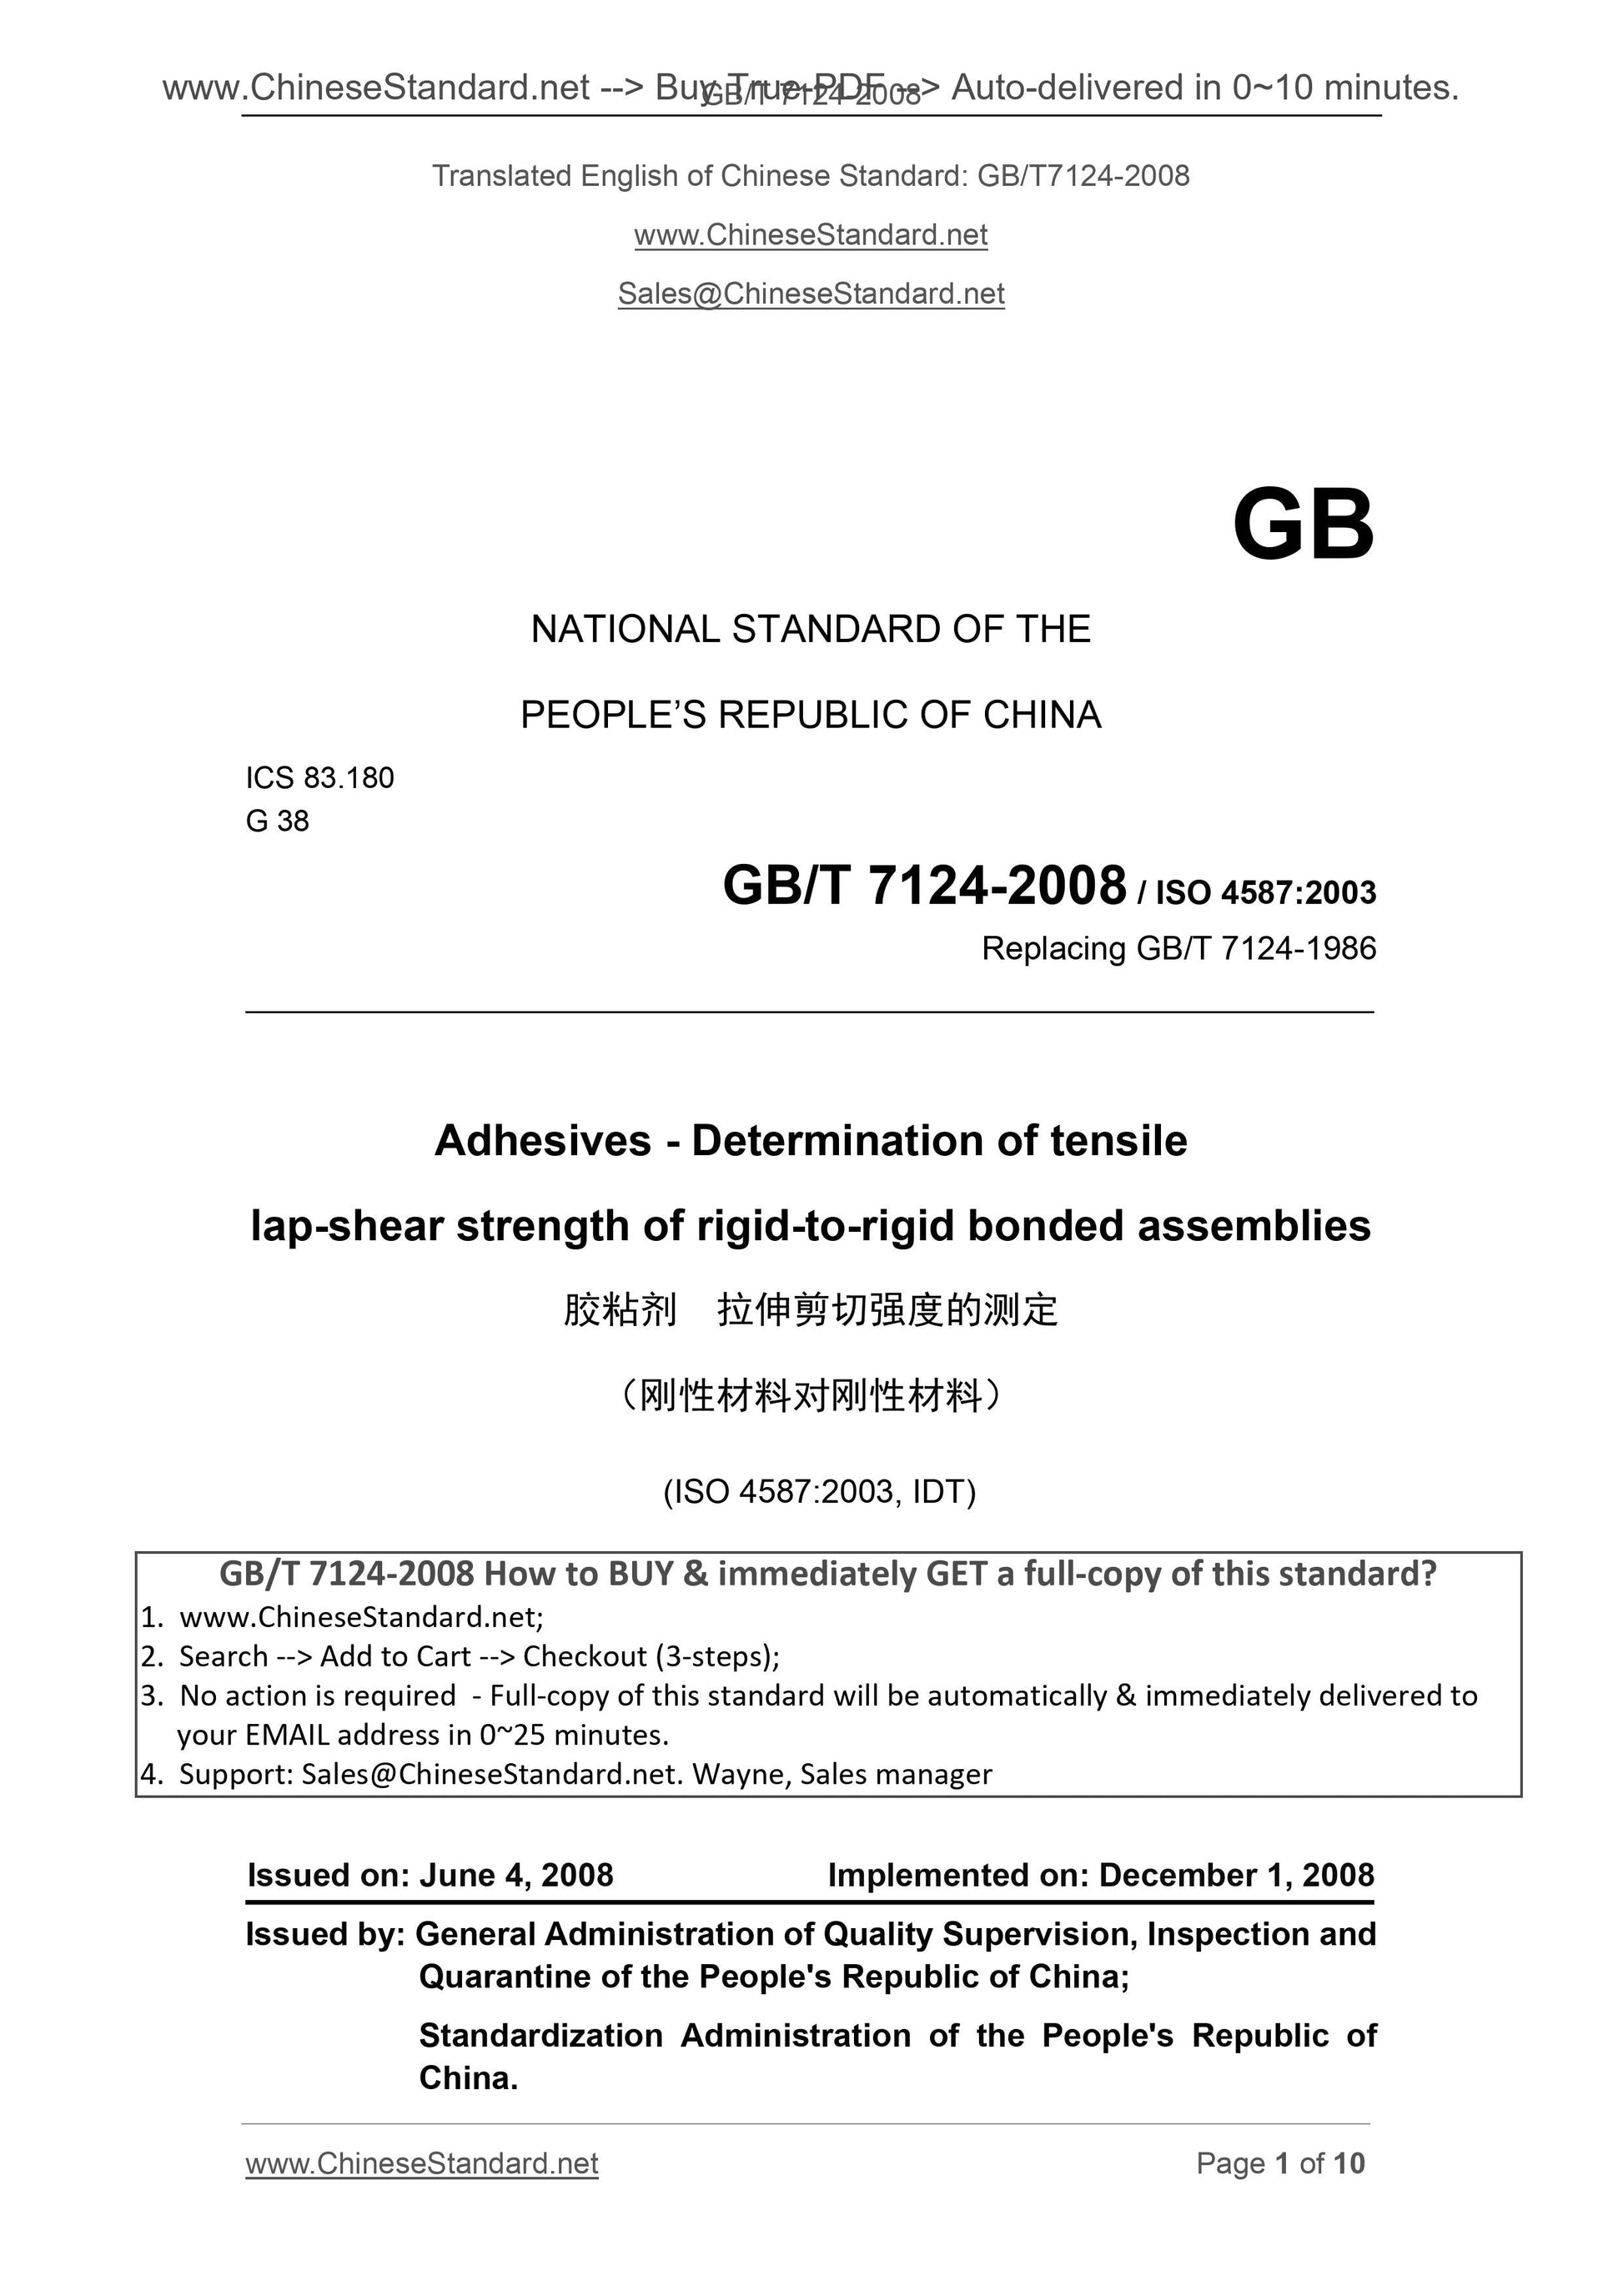 GB/T 7124-2008 Page 1